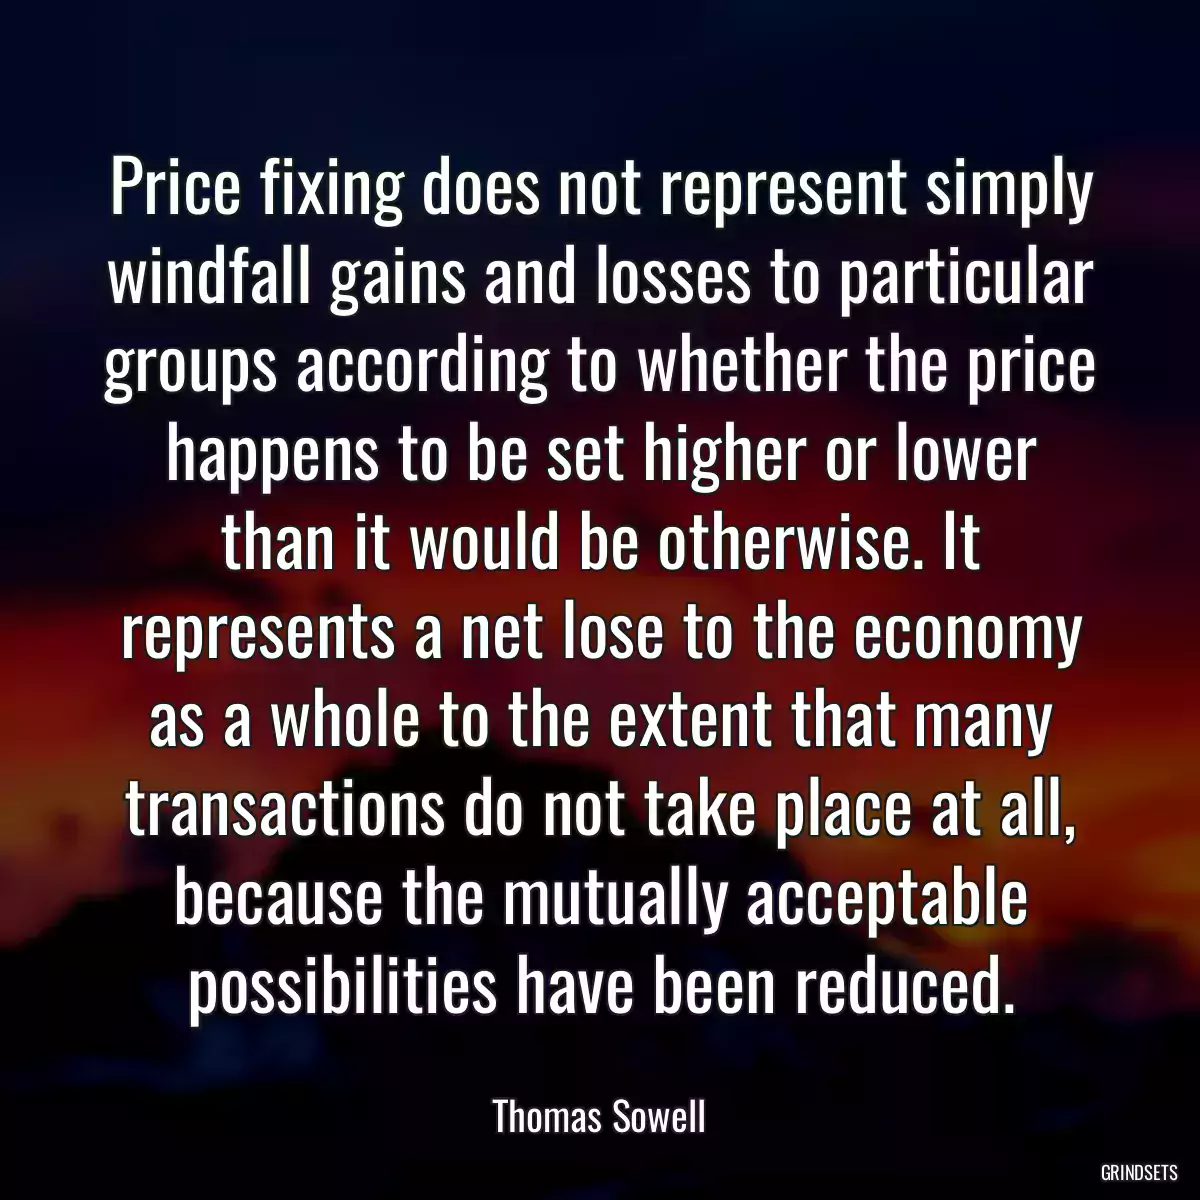 Price fixing does not represent simply windfall gains and losses to particular groups according to whether the price happens to be set higher or lower than it would be otherwise. It represents a net lose to the economy as a whole to the extent that many transactions do not take place at all, because the mutually acceptable possibilities have been reduced.